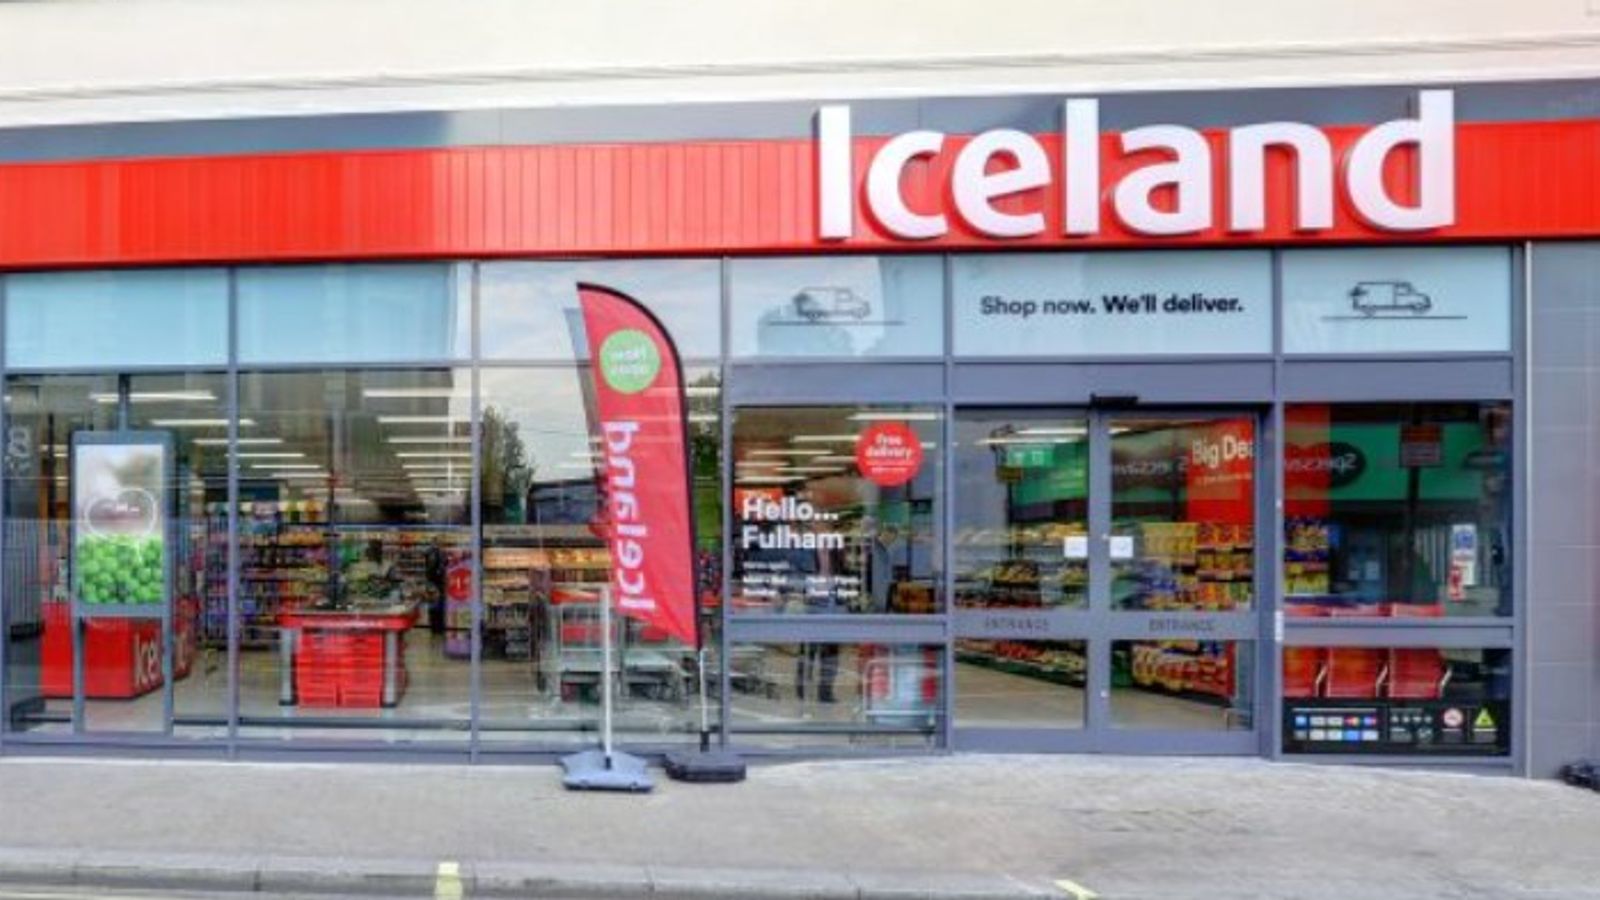 COVID: Iceland has 11% of staff isolating as retail warns Omicron rules threaten disruption